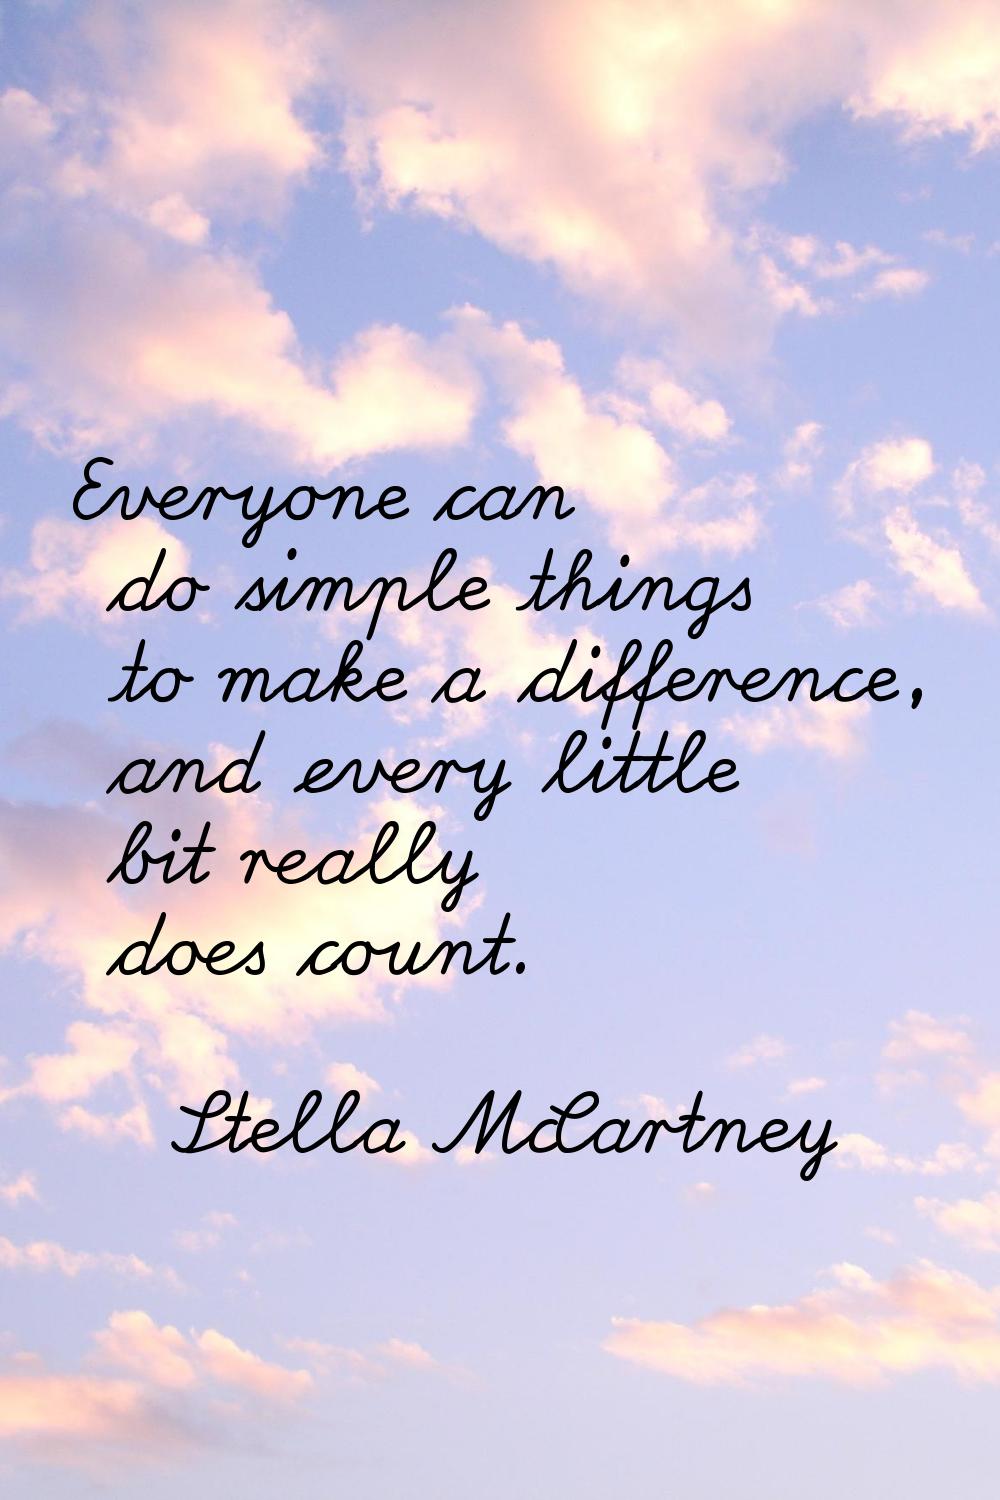 Everyone can do simple things to make a difference, and every little bit really does count.